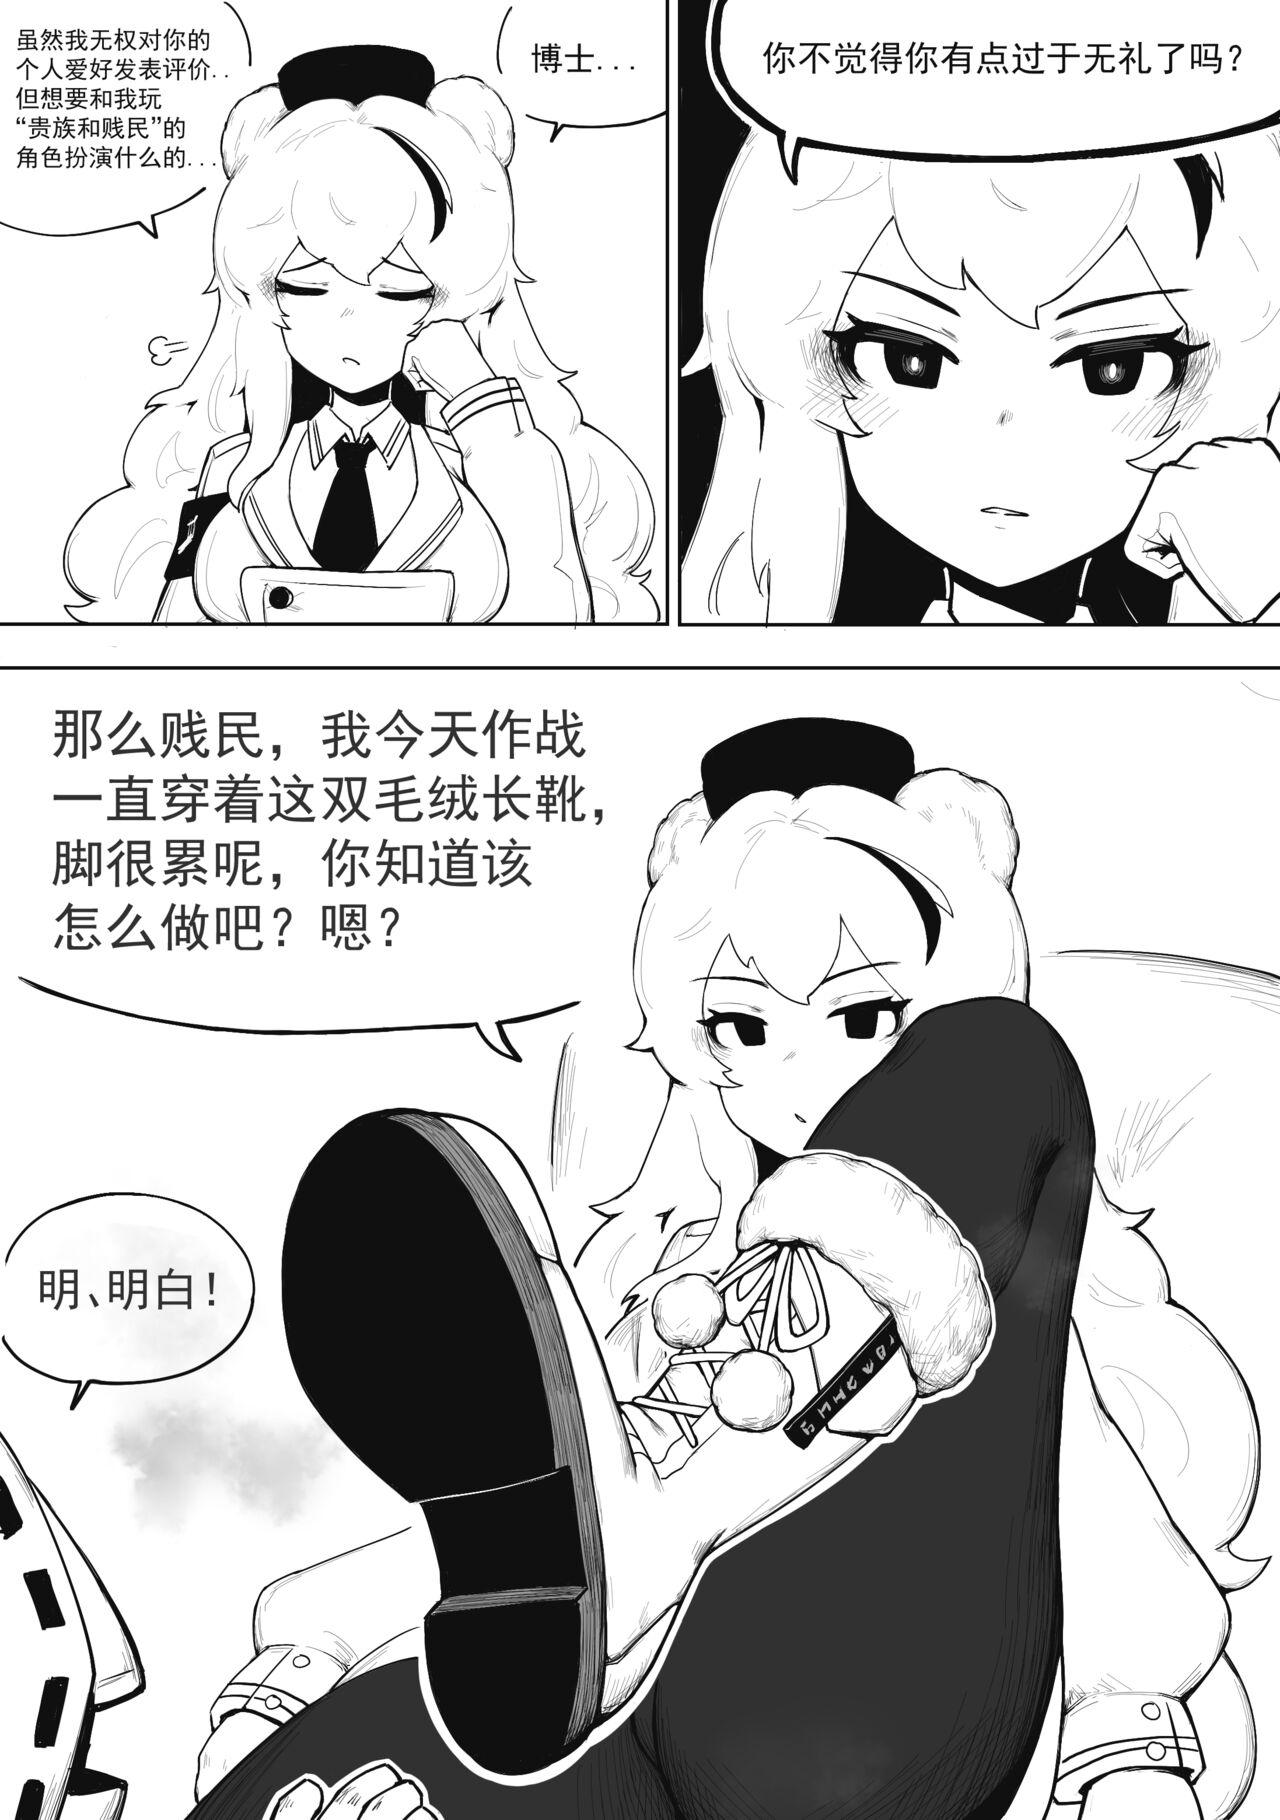 Nasty 澄澈之冰 早露 - Arknights Girlfriend - Page 1